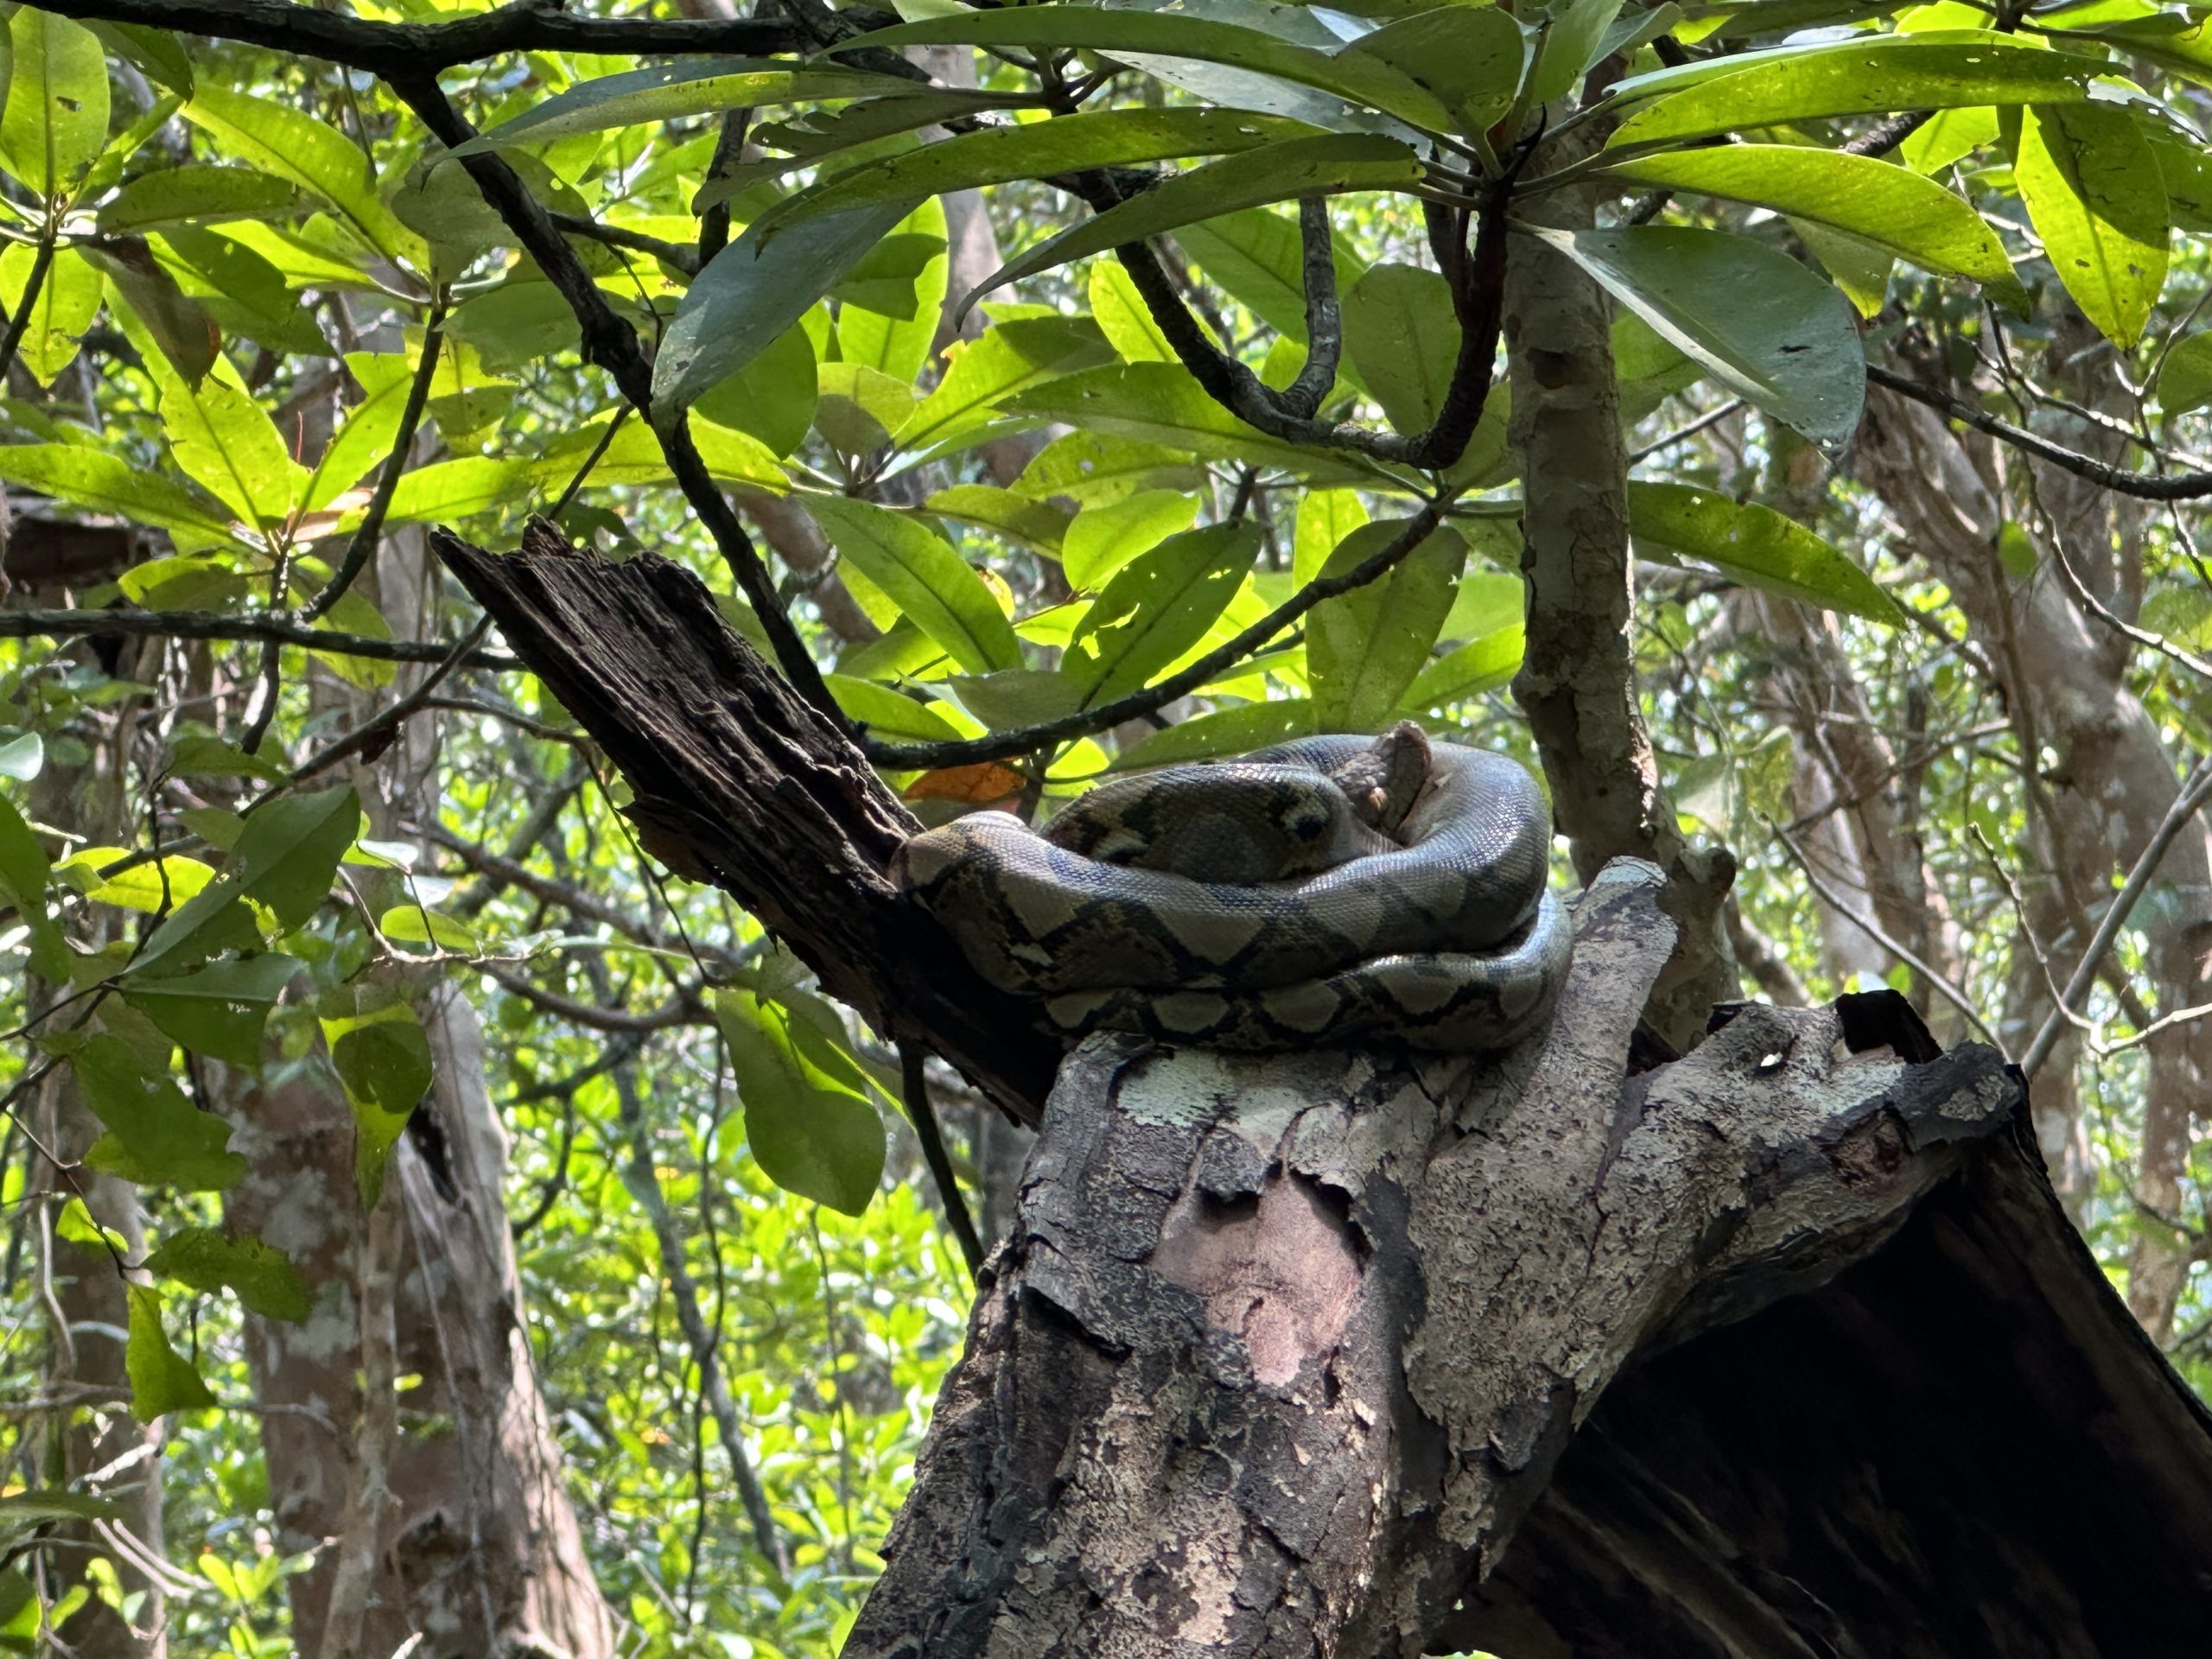 Pythons resting in the trees